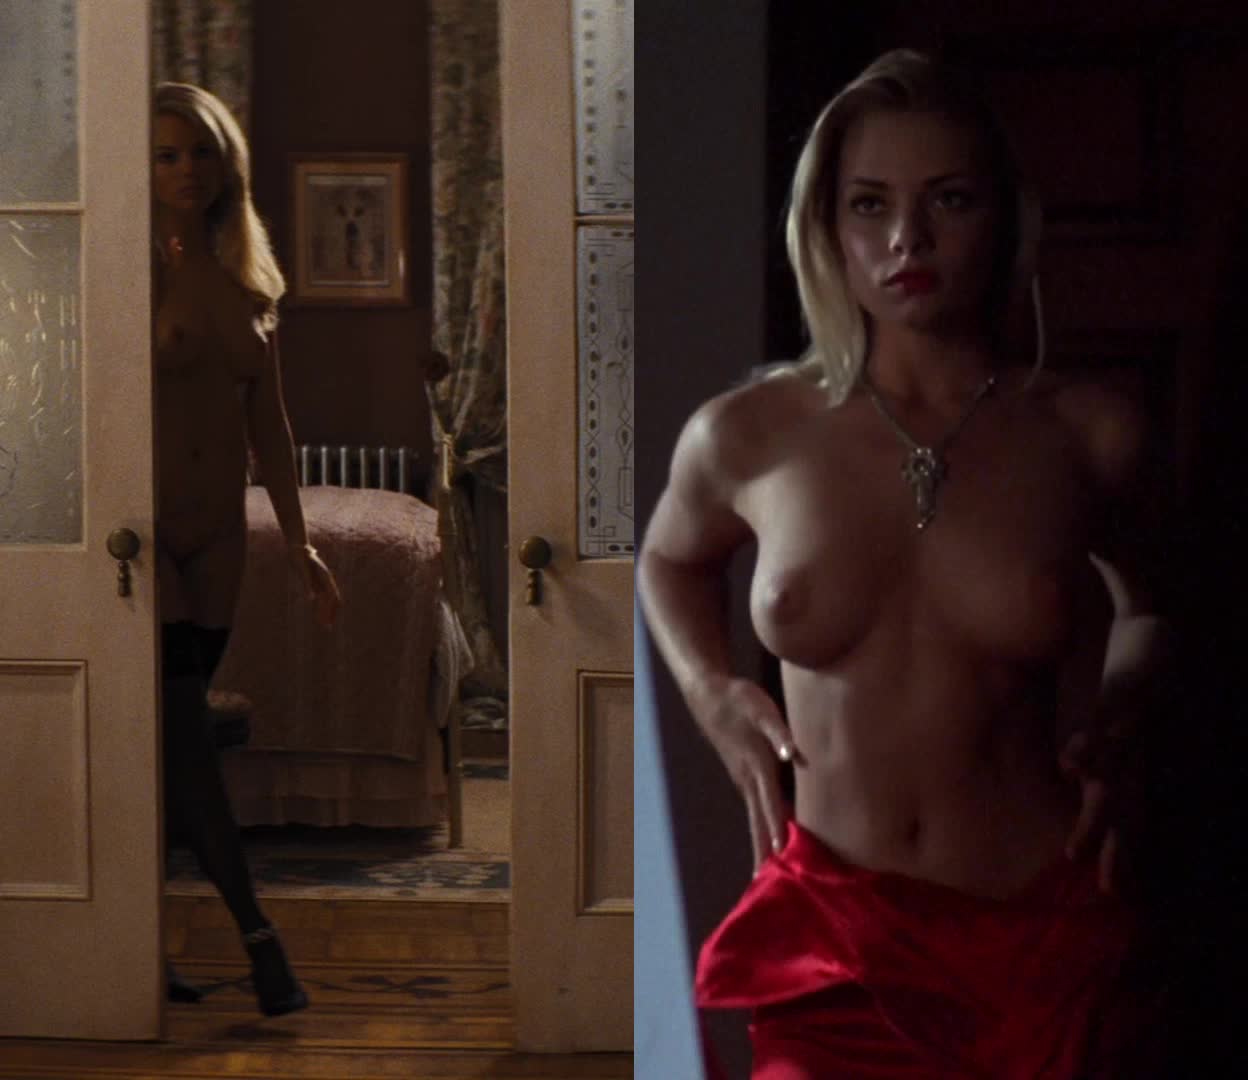 amit johal recommends margot robbie full frontal nude scene pic